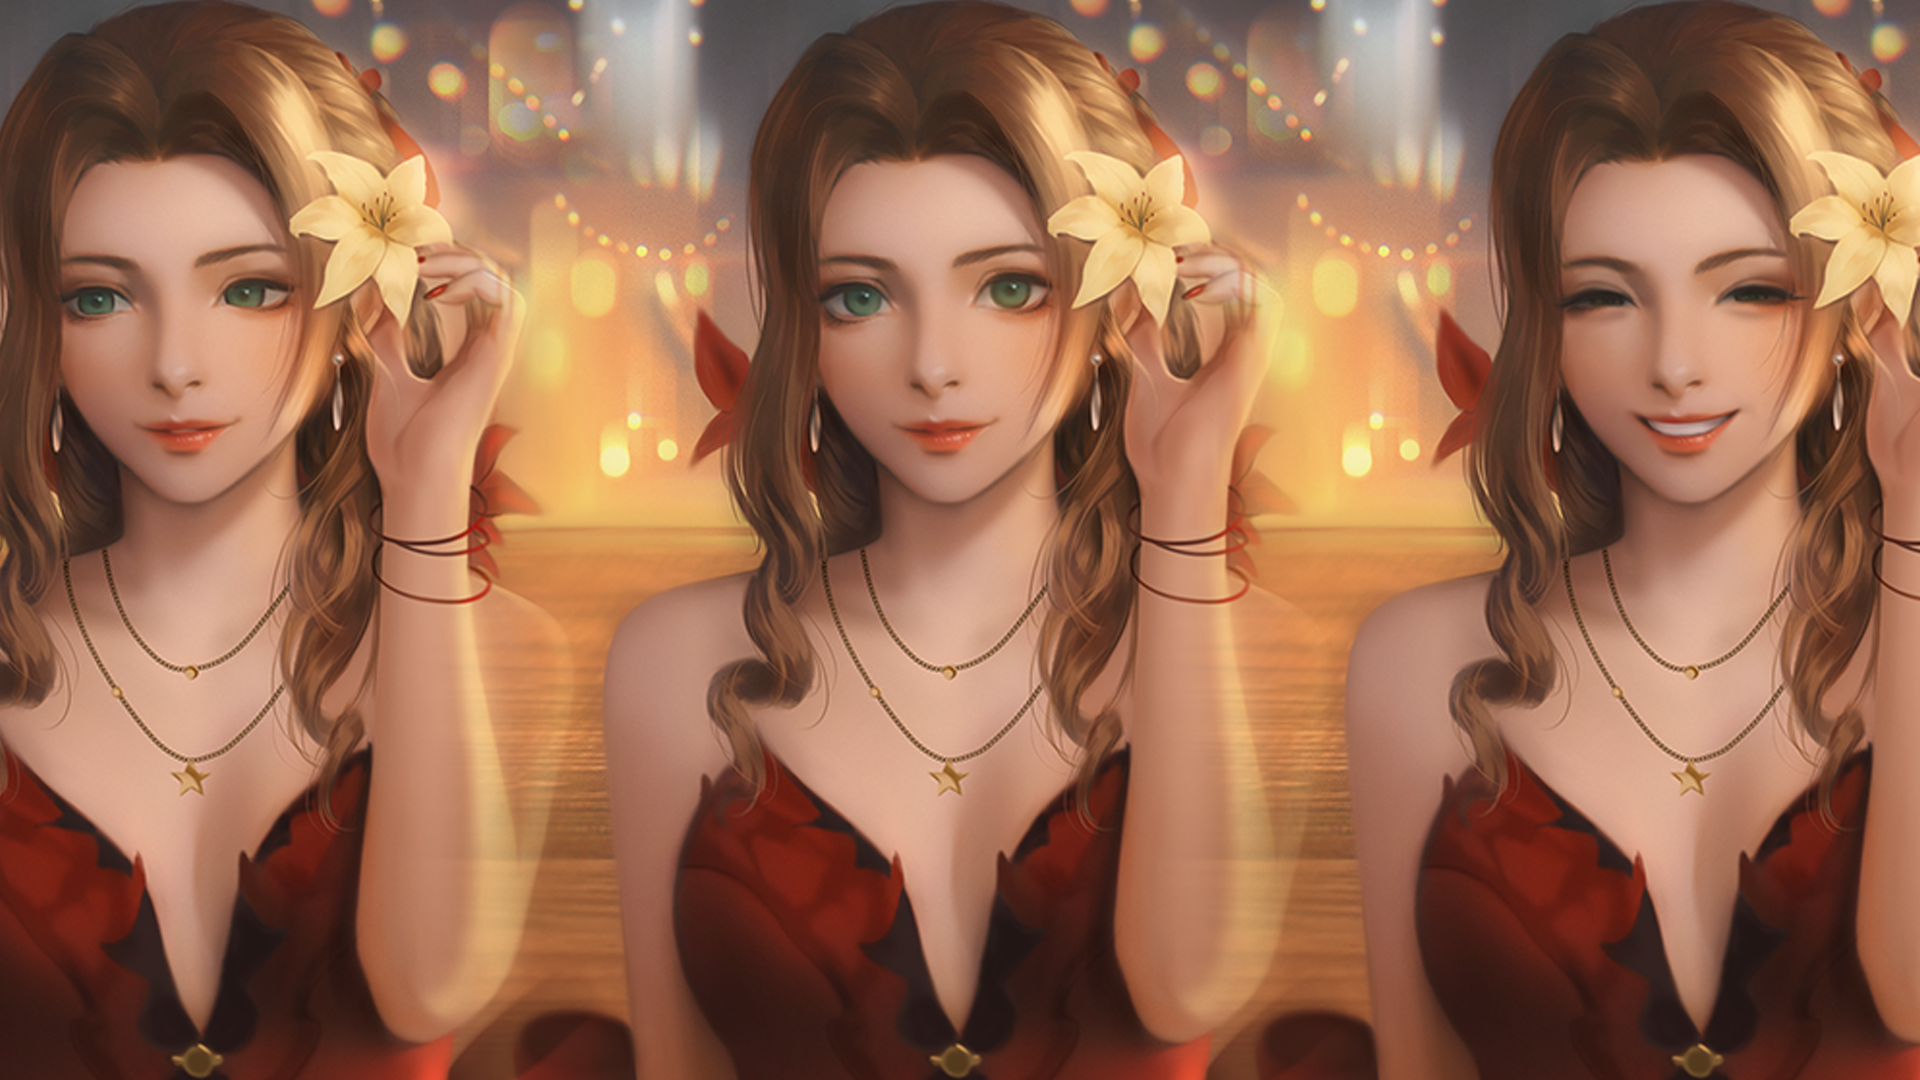 General 1920x1080 video games video game characters video game girls digital art fan art illustration Aerith Gainsborough Final Fantasy Final Fantasy VII green eyes Seungyoon Lee Square Enix